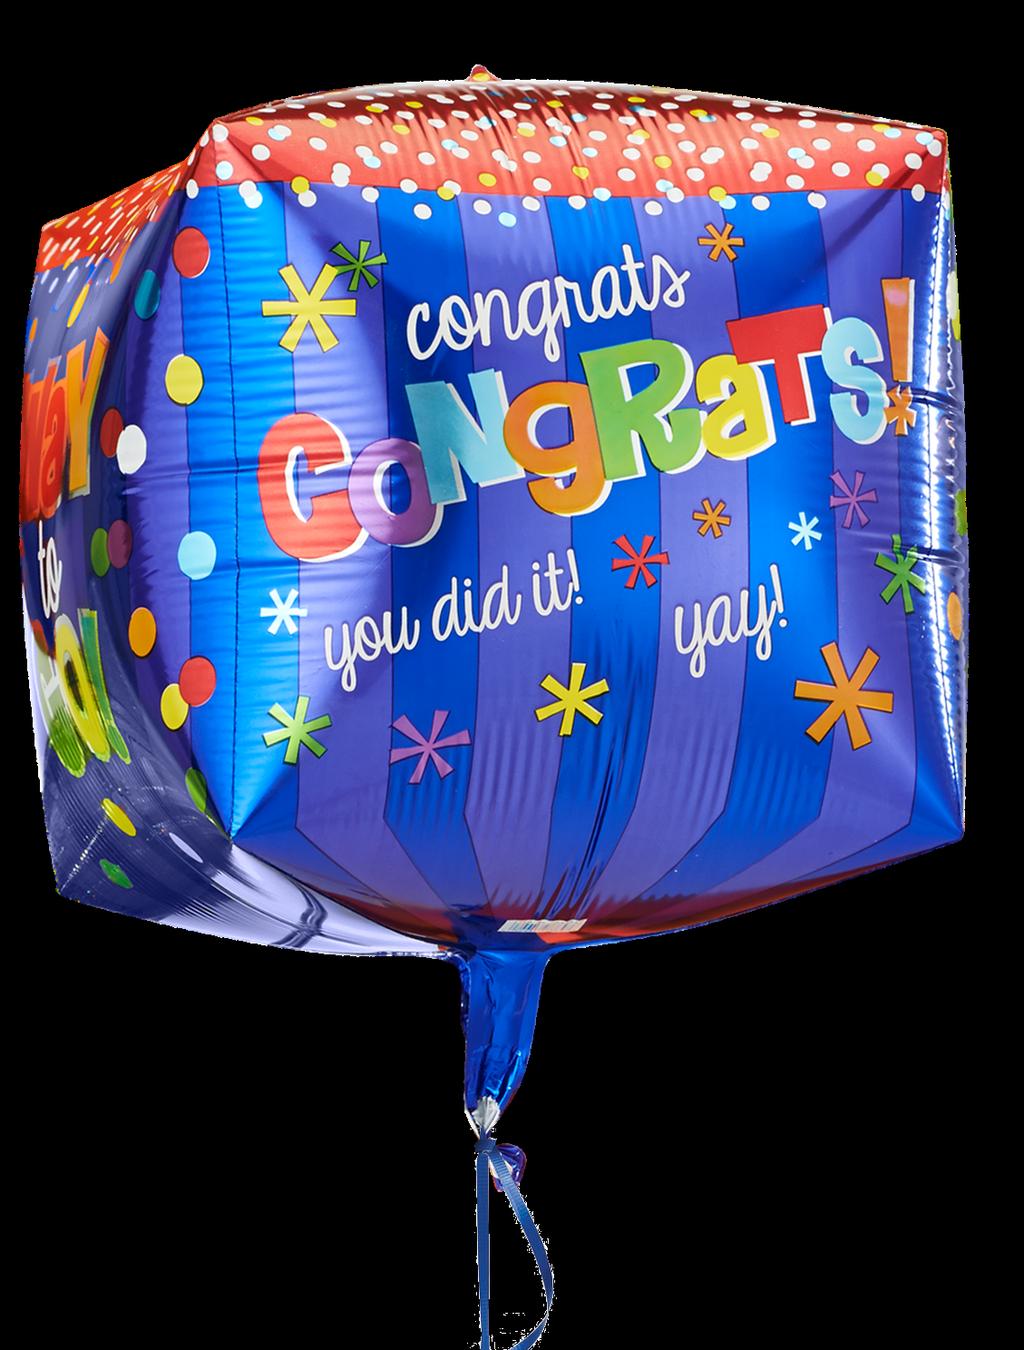 frequently asked questions what are foil balloons really made of? Anagram foil balloons are made of polyethylene terephthalate (PET) or nylon, both are man made materials.